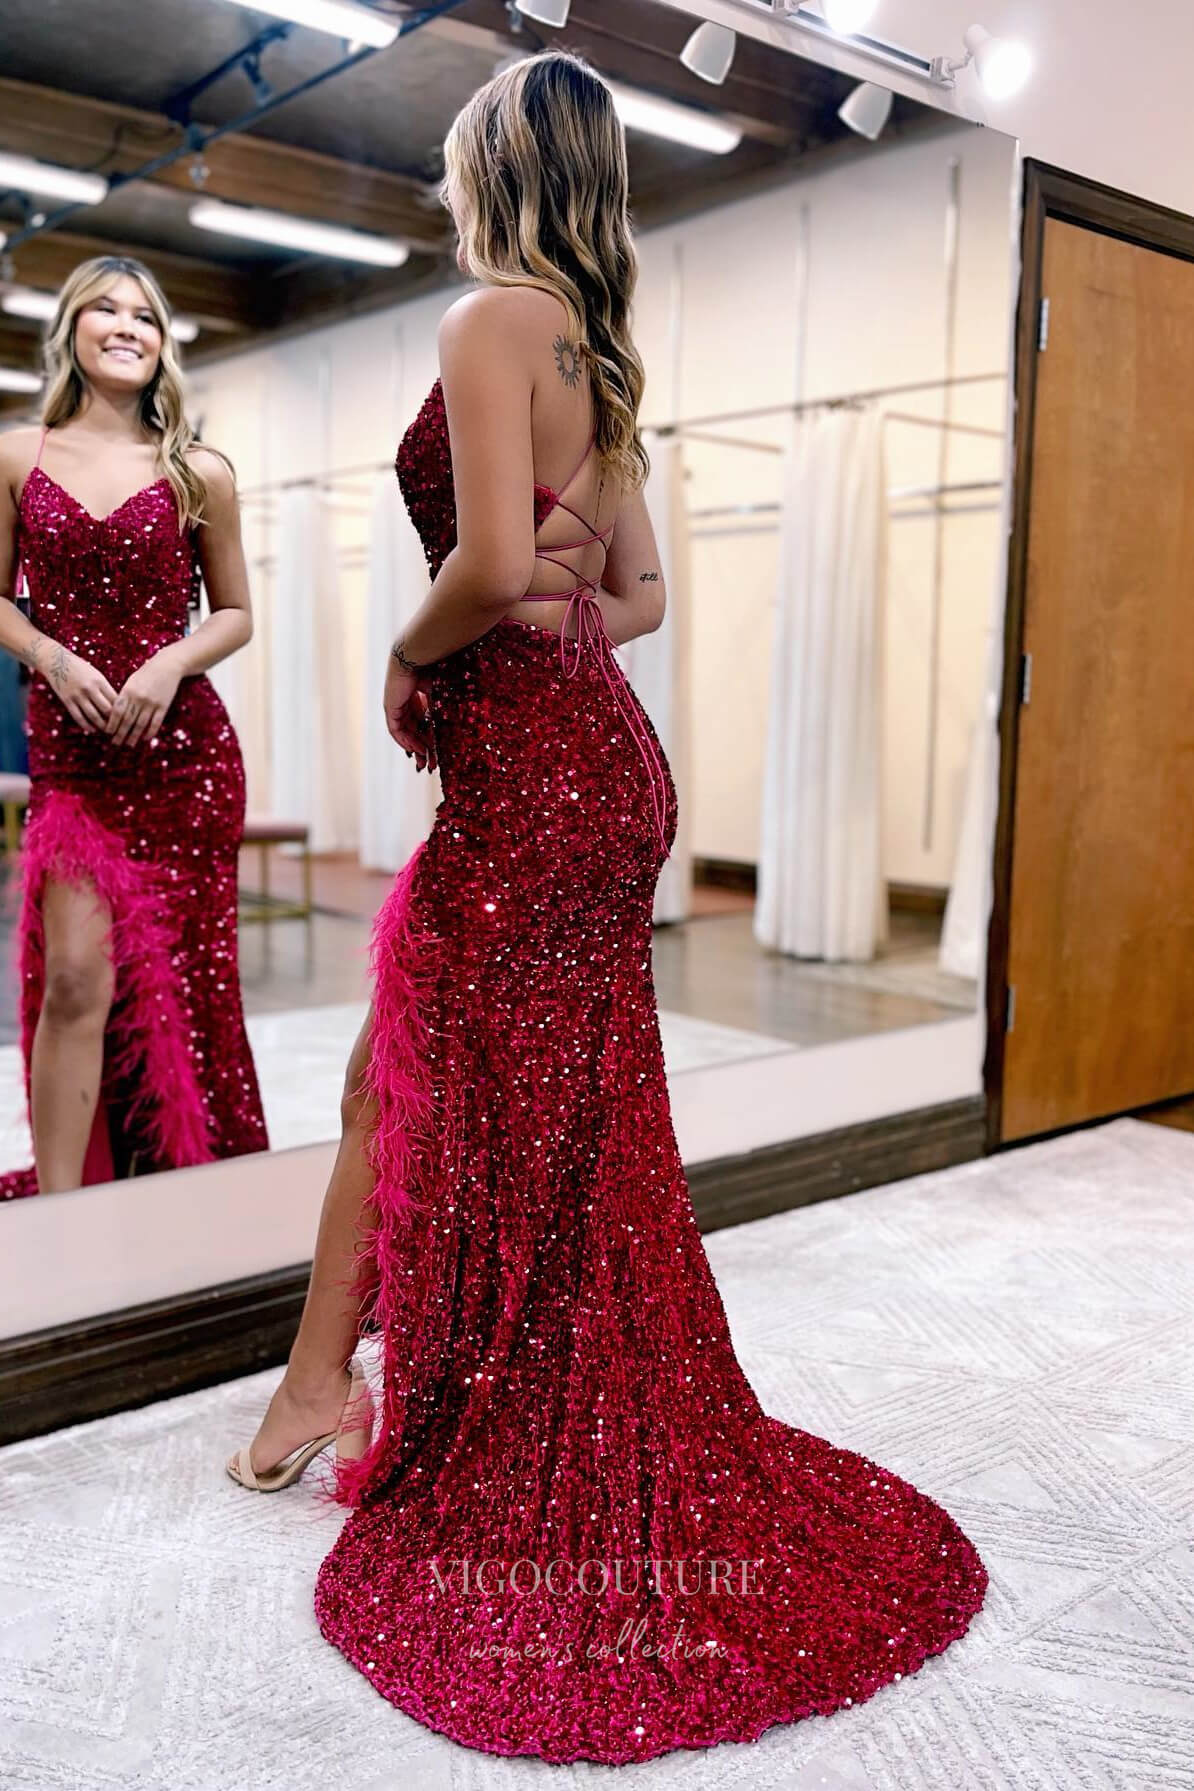 Stunning Sequin Mermaid Prom Dress with Slit, Feathers, and Spaghetti Straps 22185-Prom Dresses-vigocouture-Black-Custom Size-vigocouture